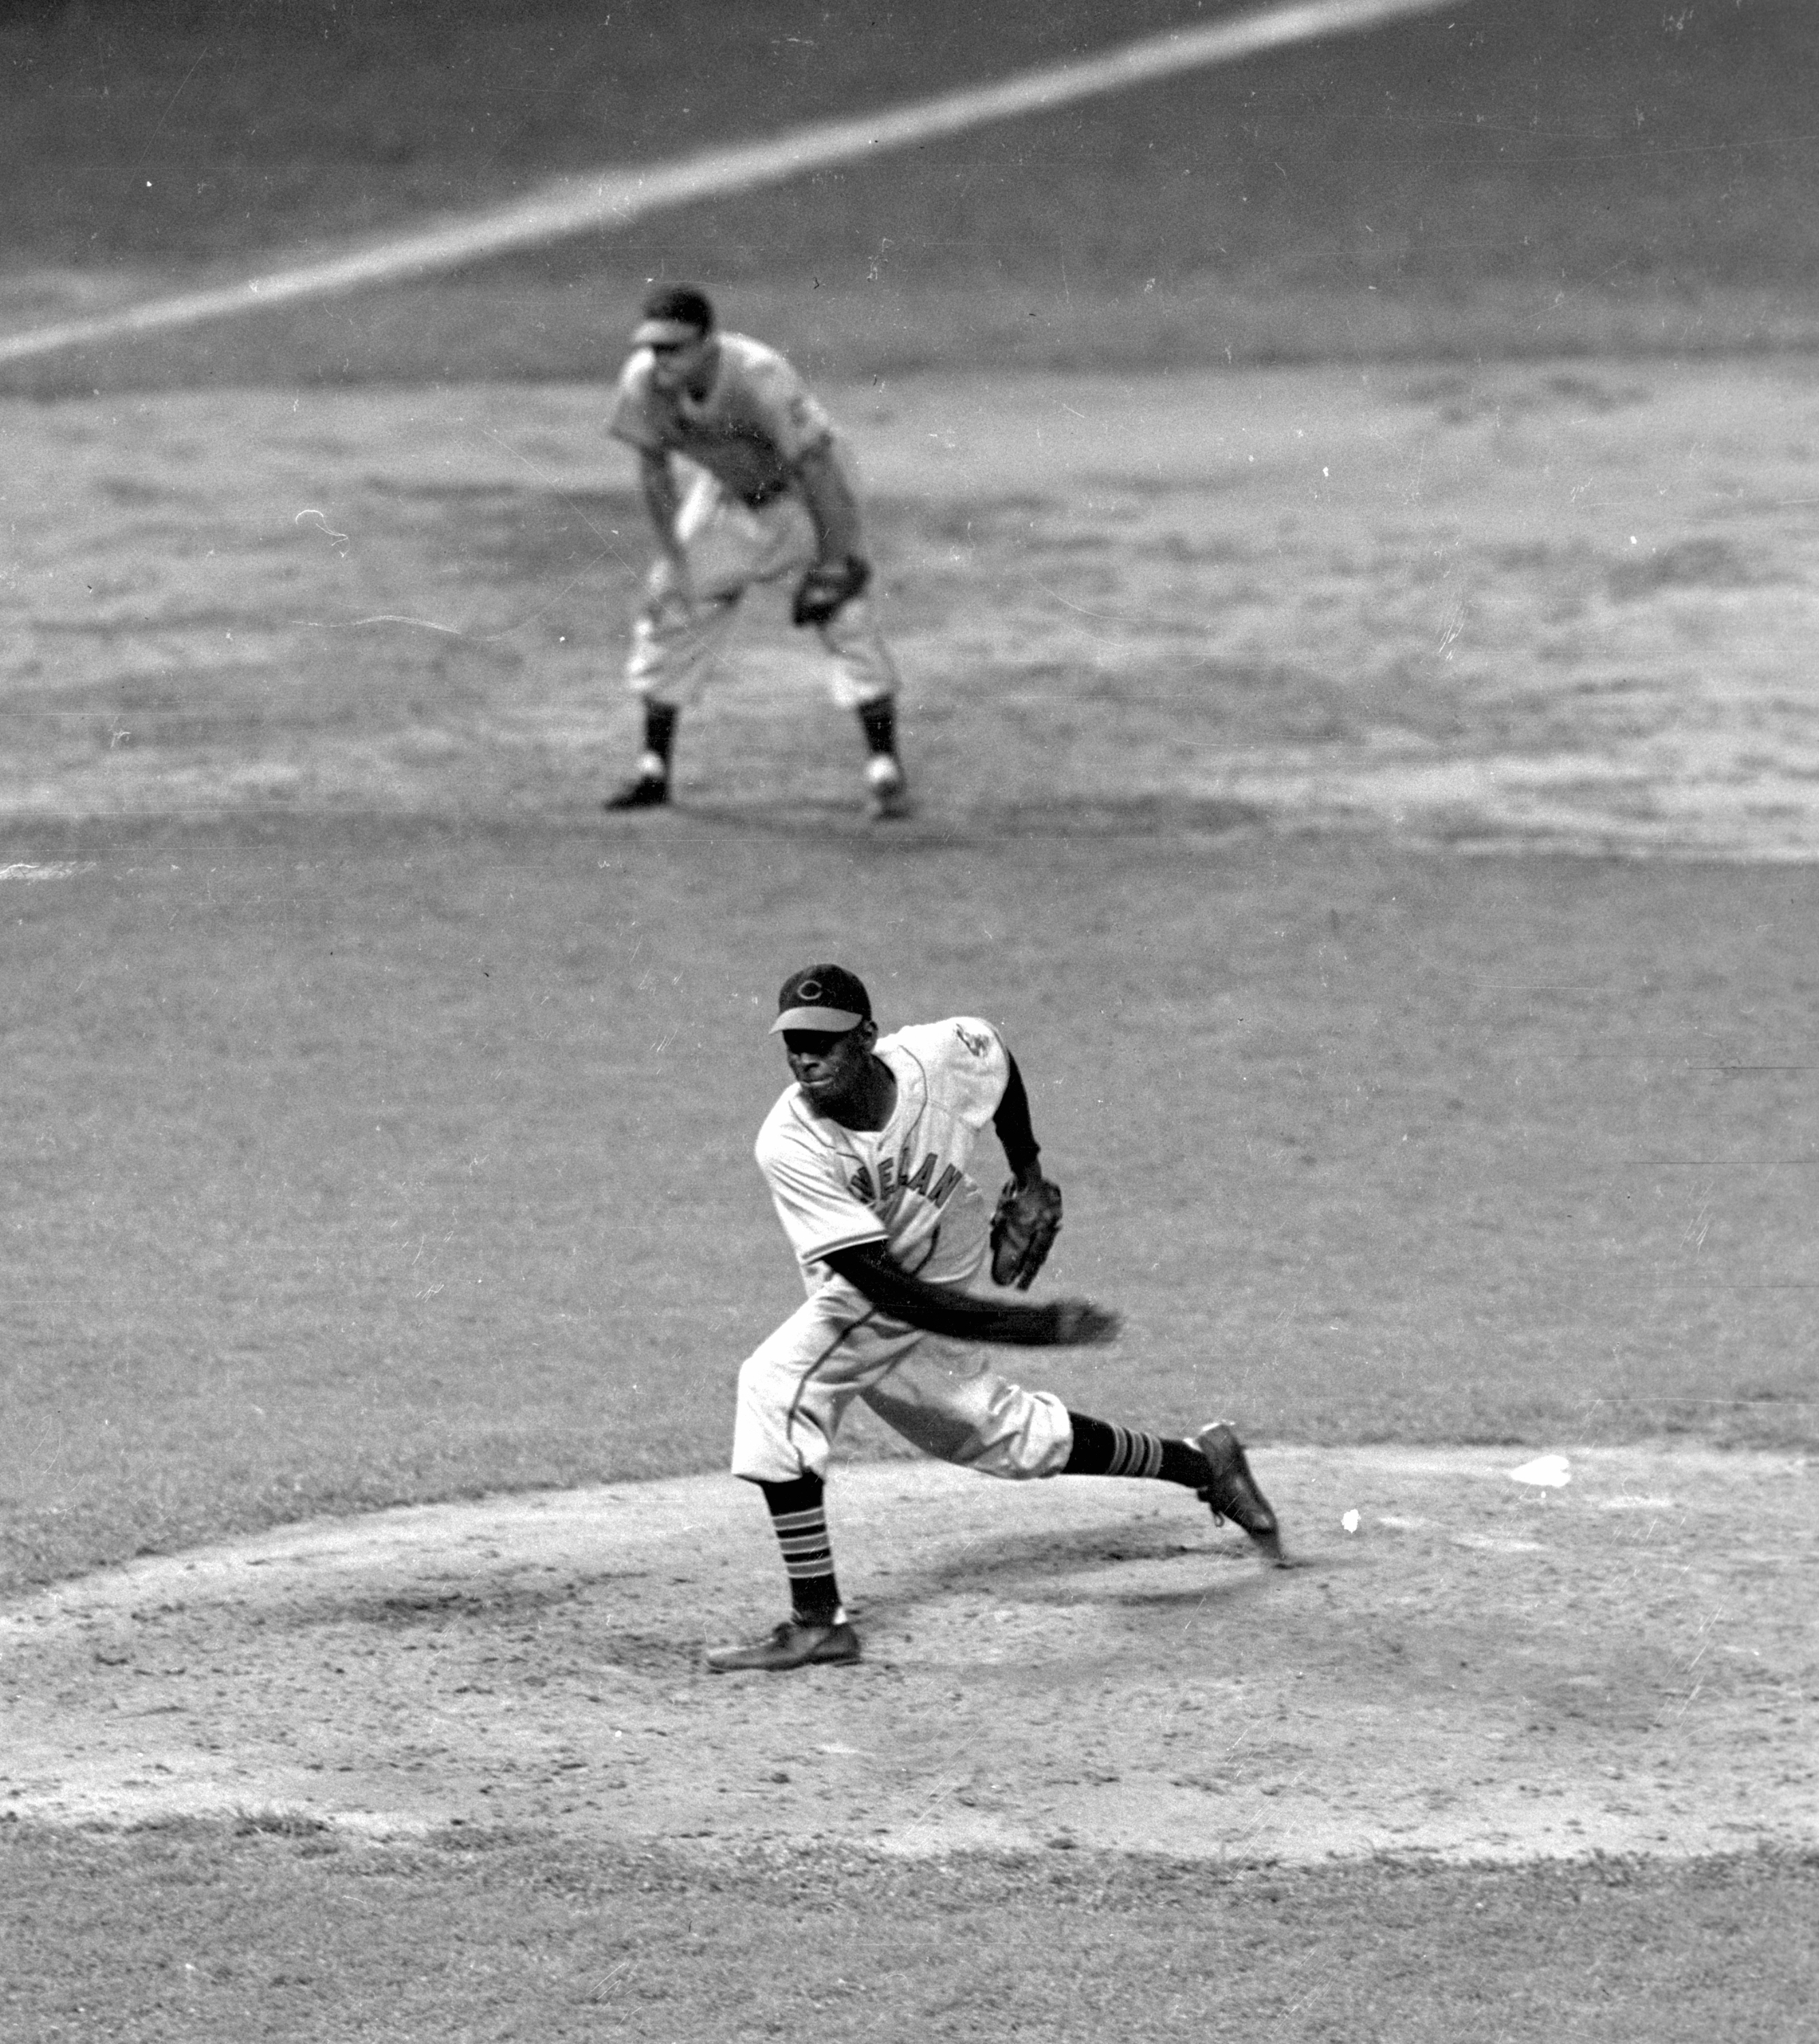 Satchel Paige signed to the Cleveland Indians in 1948, making it the year of his major league baseball debut. Here, Paige pitches in relief in the 6th inning against the Yankees at New York's Yankee Stadium on July 22, 1948.